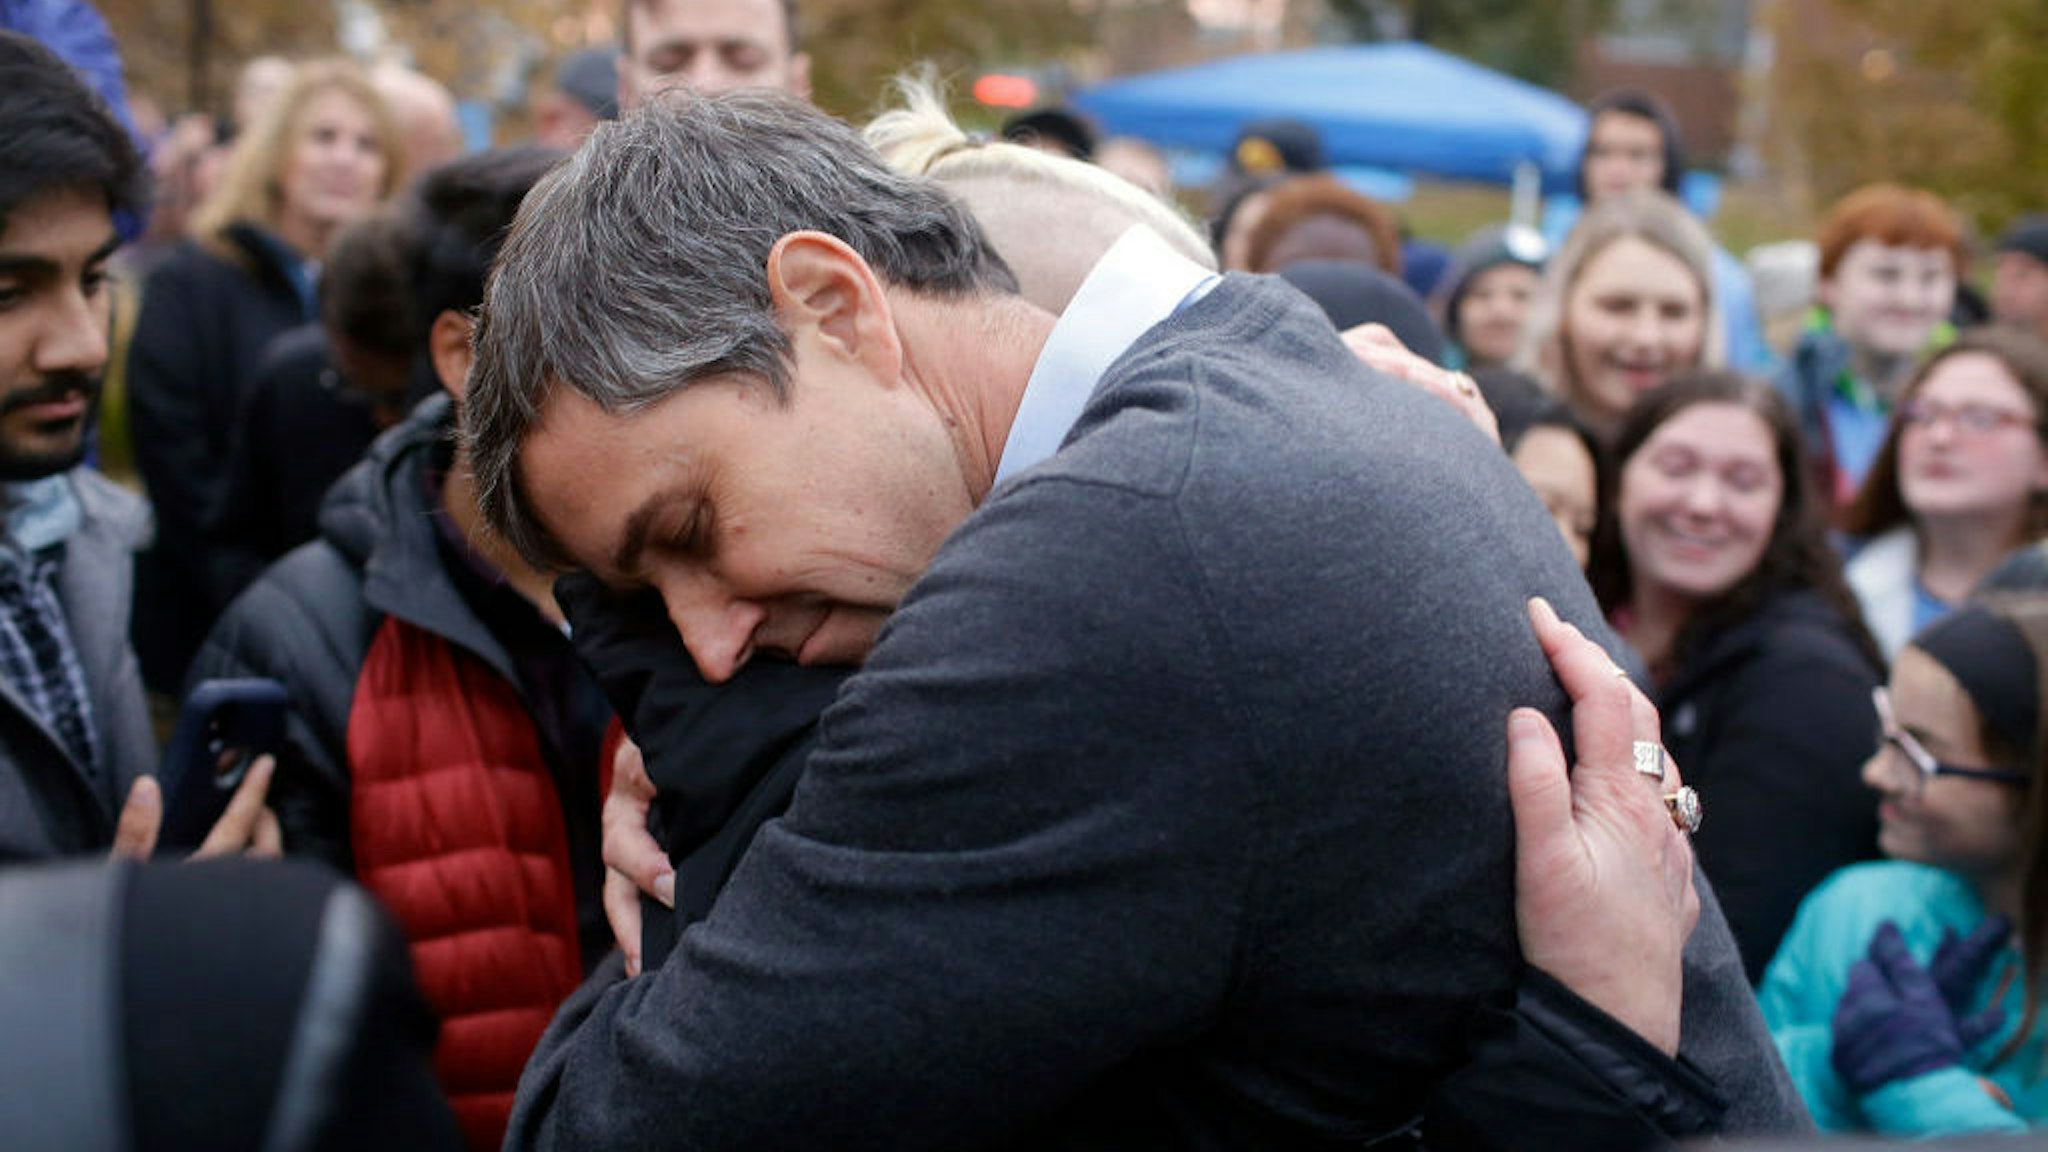 Democratic presidential candidate and former Rep. Beto O'Rourke (D-TX) hugs volunteer Charlie Jordan after announcing he was dropping out of the presidential race before the start of the Iowa Democratic Party Liberty &amp; Justice Celebration on November 1, 2019 in Des Moines, Iowa. Fourteen presidential are expected to speak at the event addressing over 12,000 people. (Photo by Joshua Lott/Getty Images)